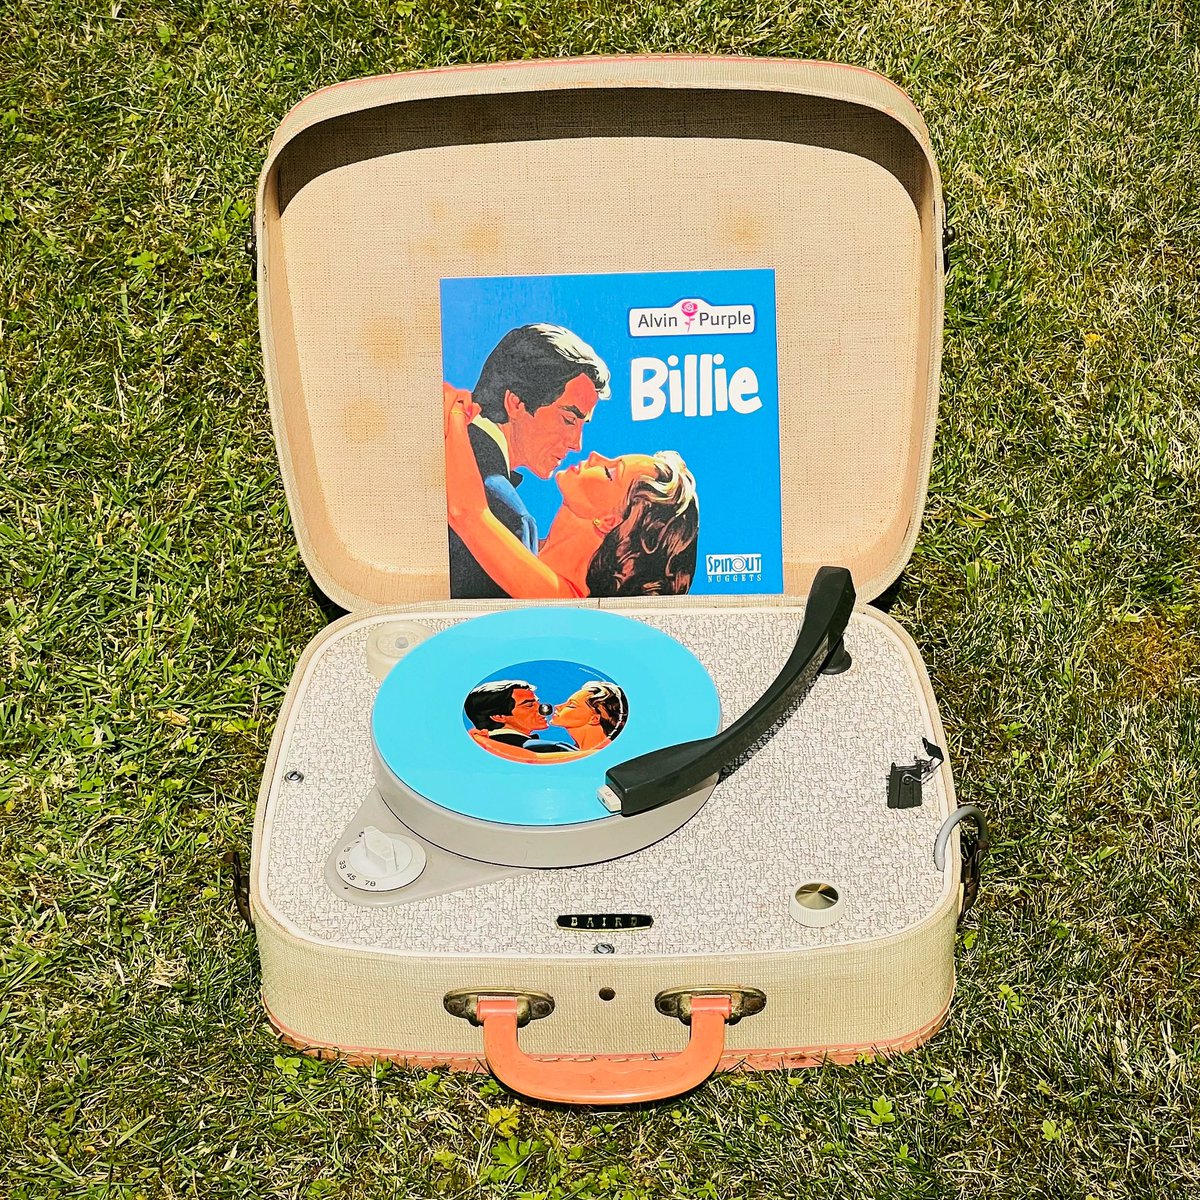 A good day for listening to records in the garden, especially this recent release from Alvin Purple, which includes ‘Sunny Garden Weather’, coincidently on sky blue vinyl…